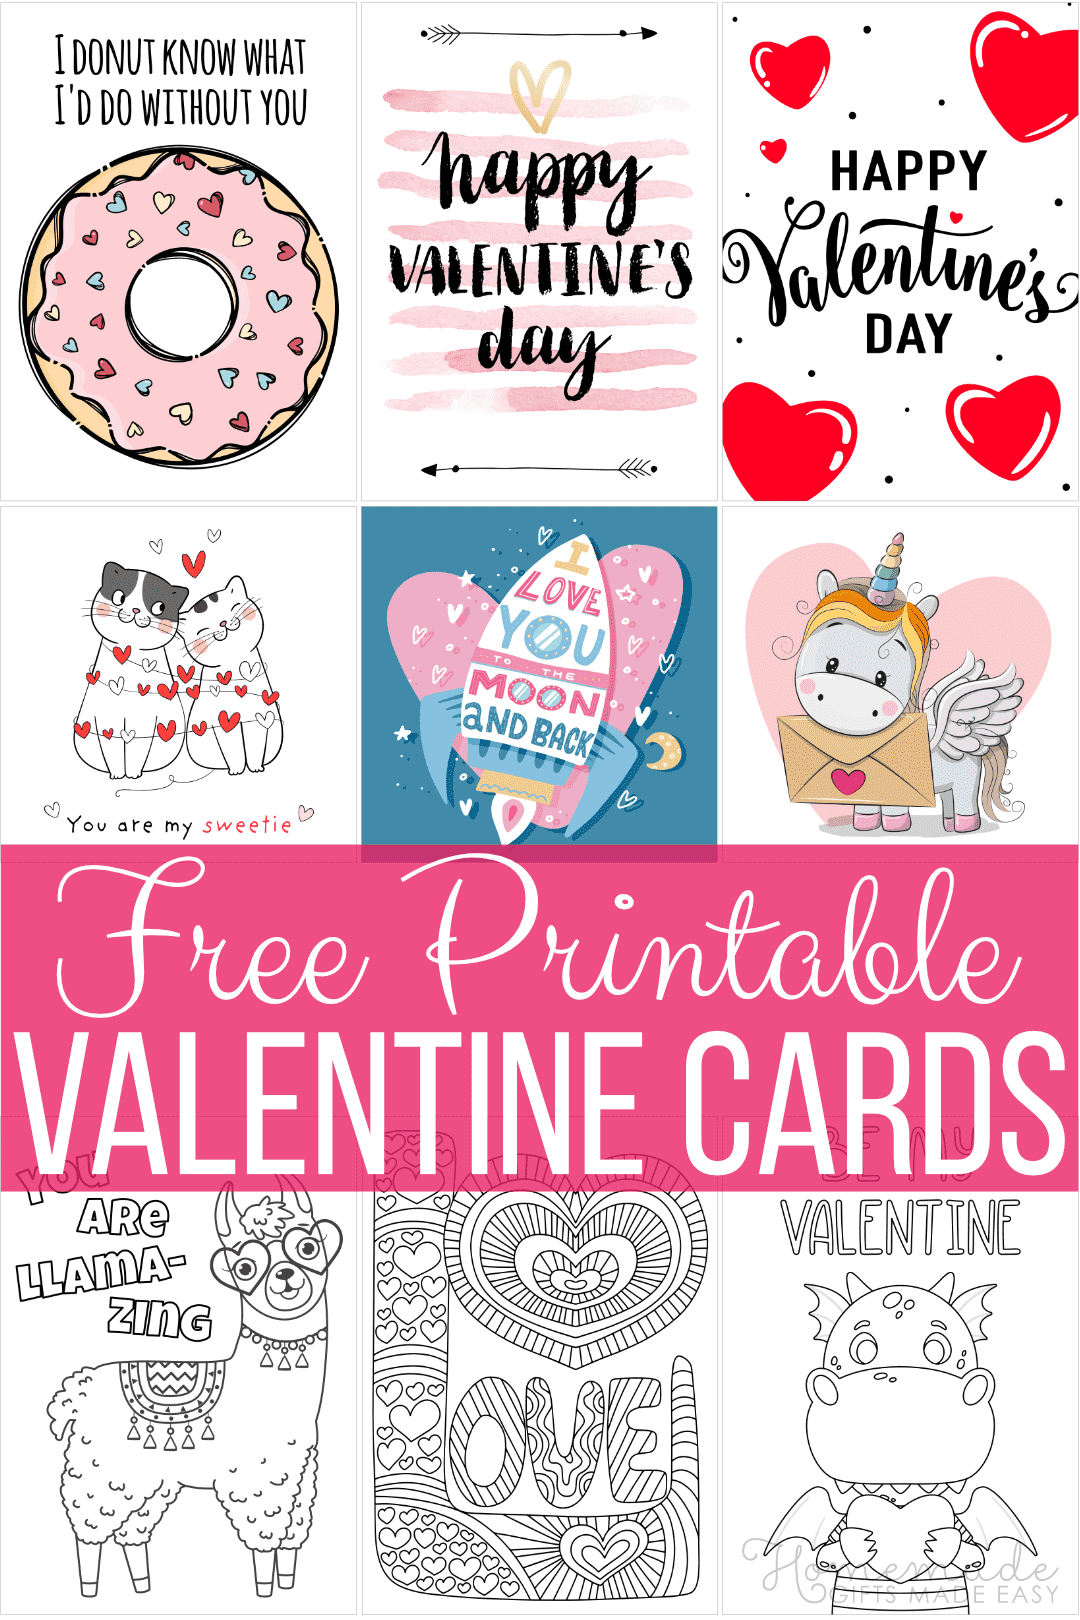 70 Free Printable Valentine Cards for 2021